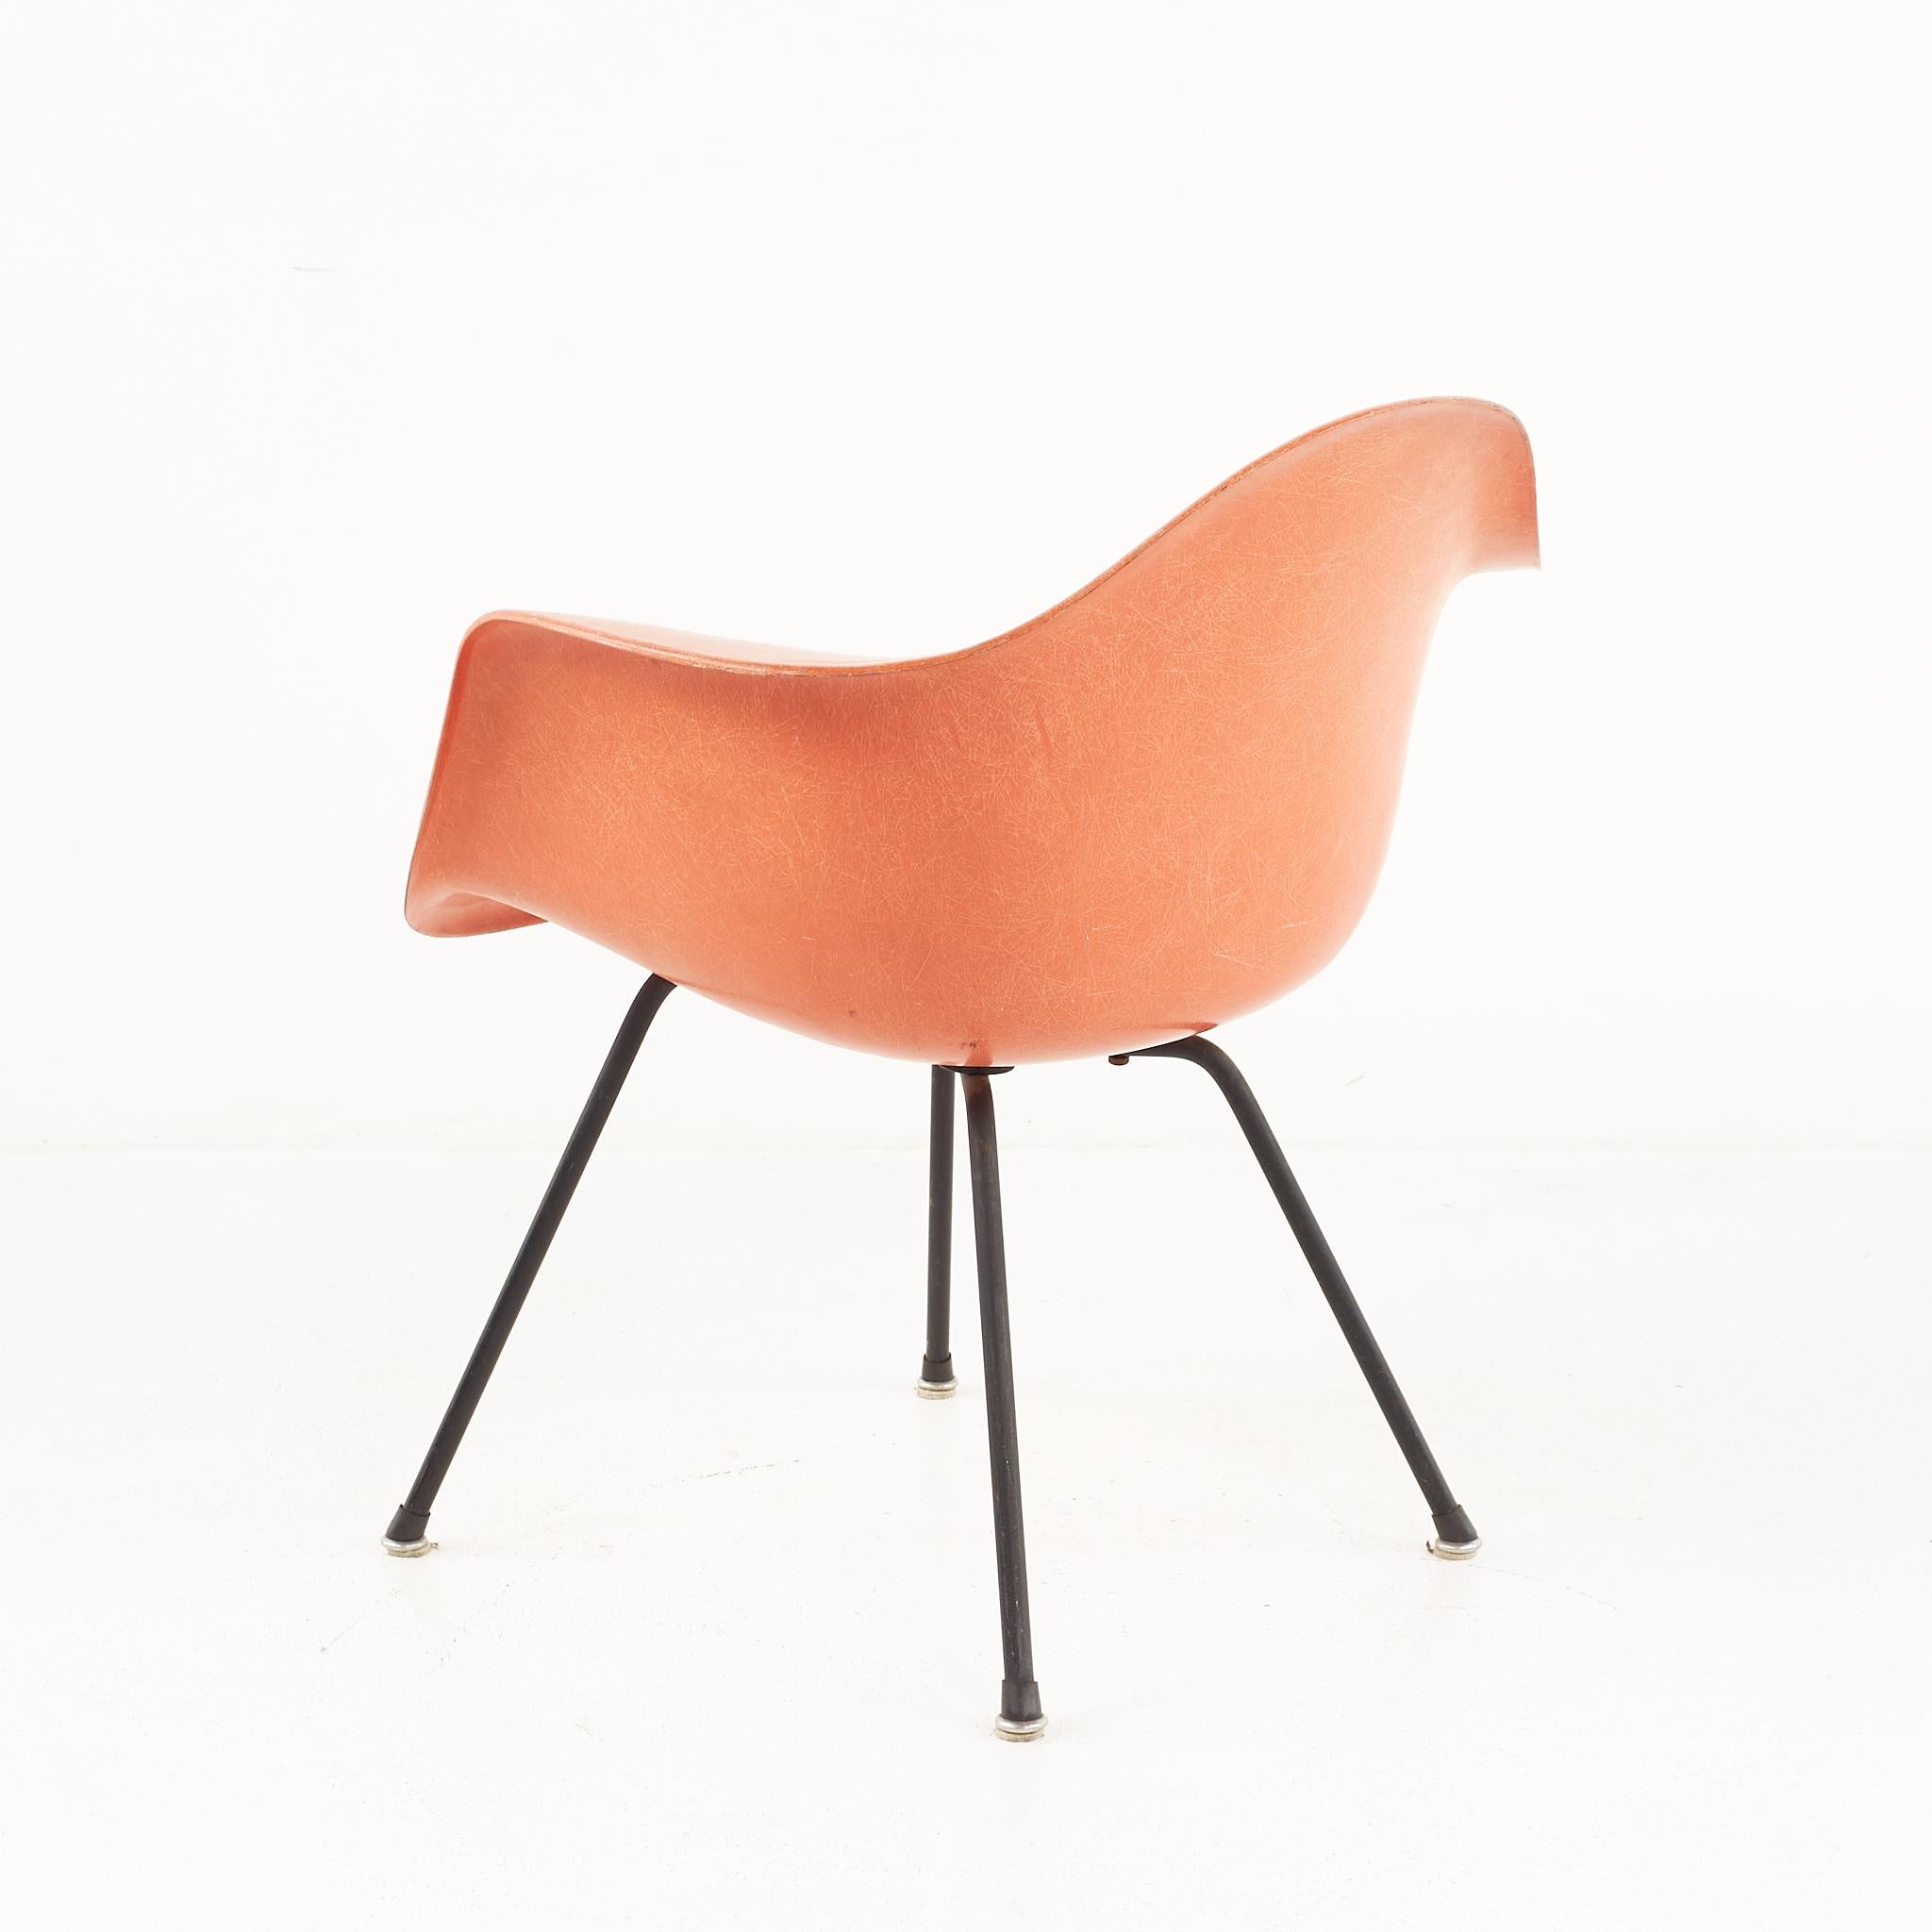 Late 20th Century Early Charles and Ray Eames for Herman Miller MCM Orange Fiberglass Shell Chair